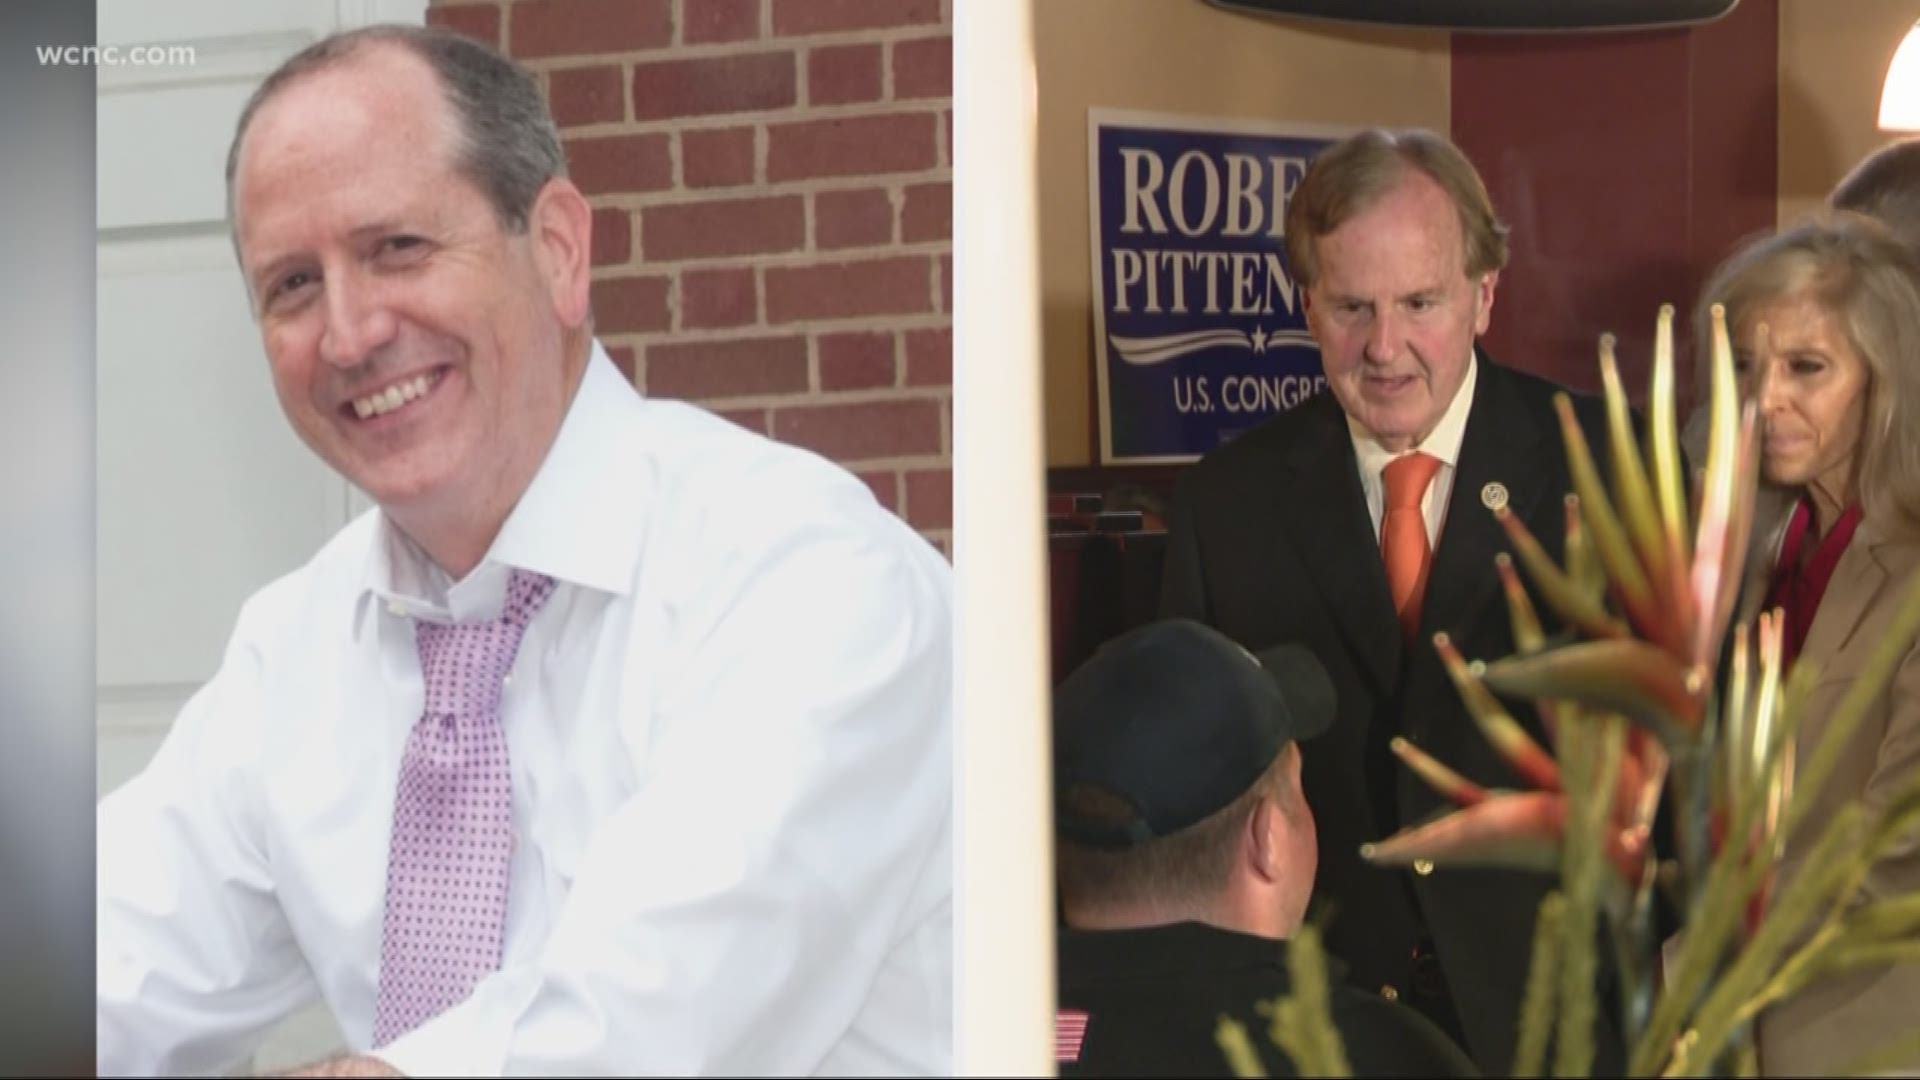 In a statement, Pittenger endorsed Matthew Ridenhour and made claims about another candidate, Senator Dan Bishop.